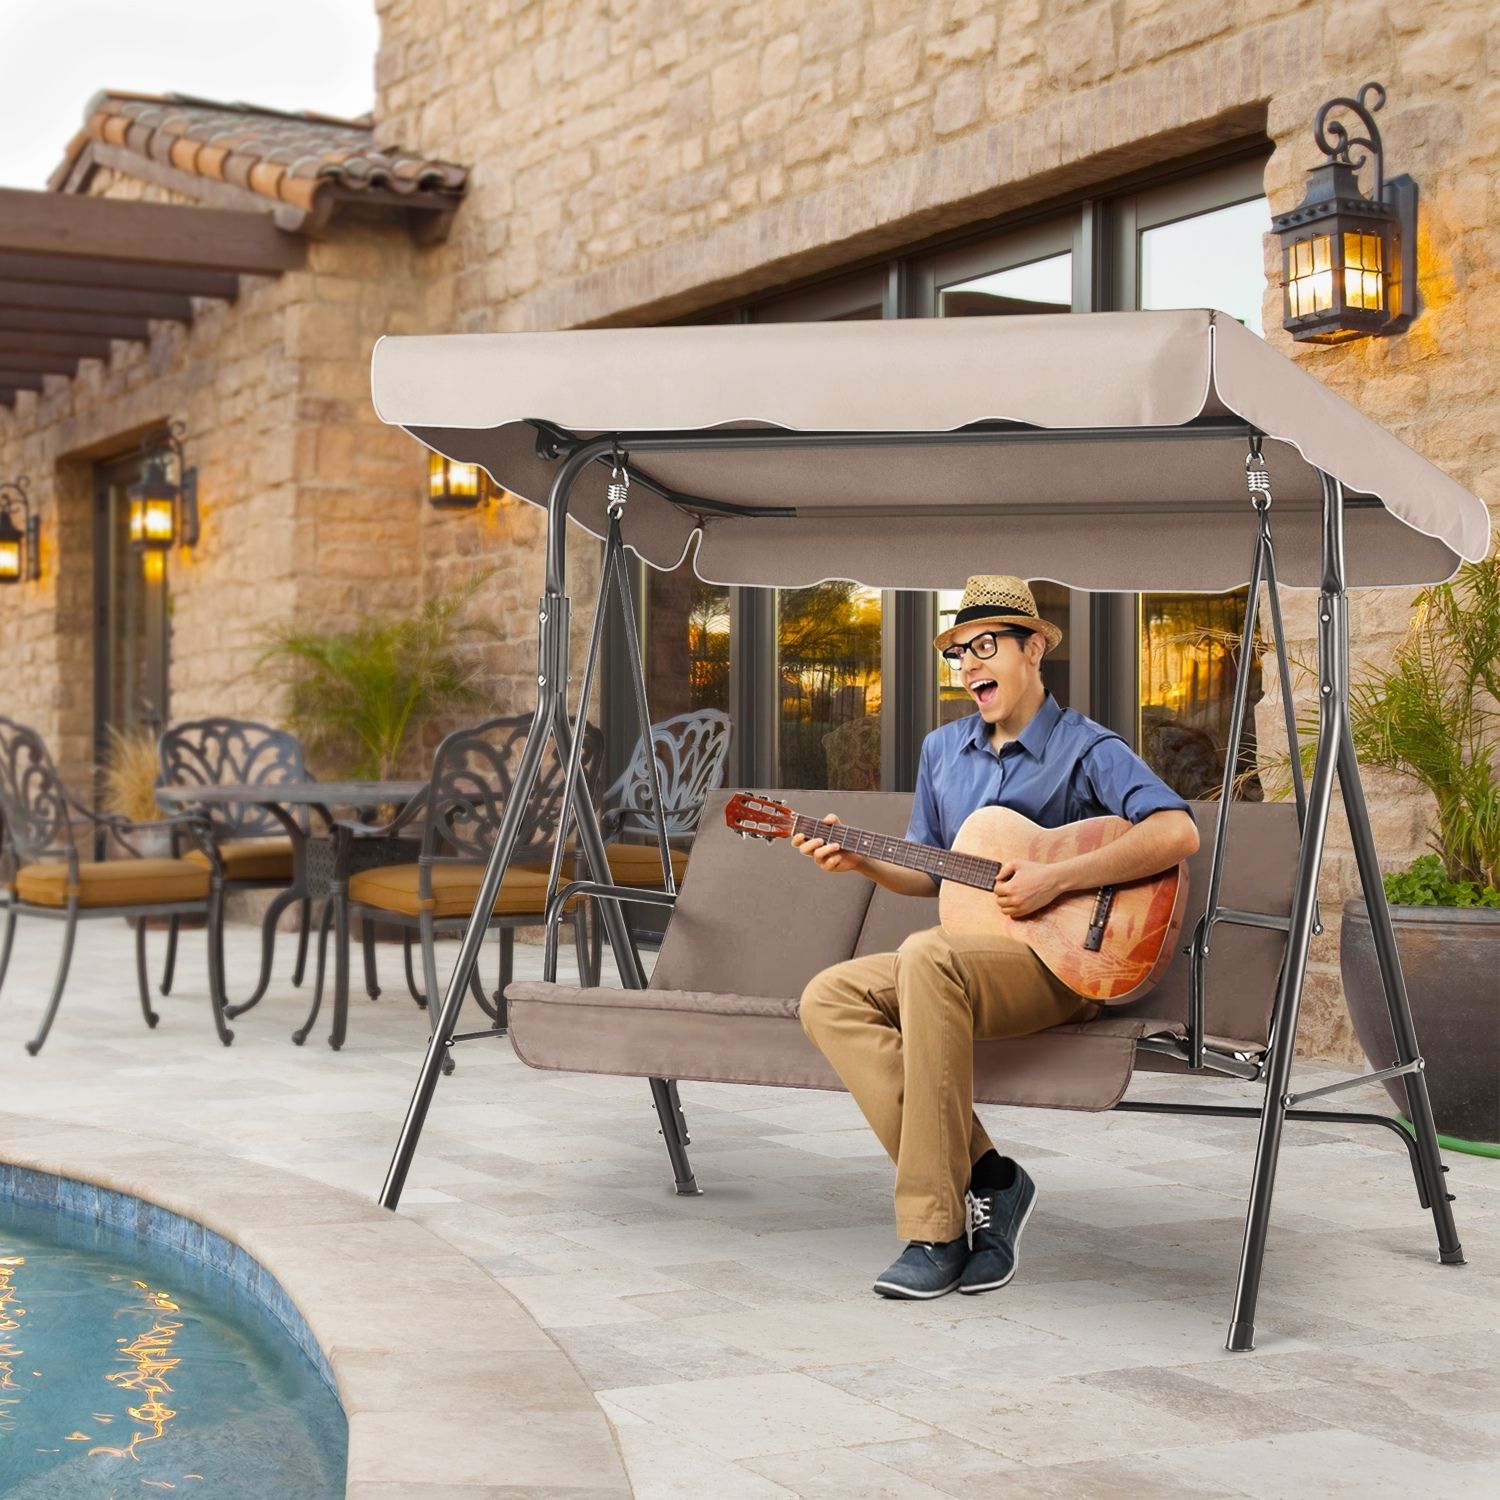 UV Protection and Weather Resistant -  The patio swing canopy replacement is durable UV blocking & water, mildew, fade and stain resistance; Offering protection from the blazing sun and creating shade to enjoy outdoor canopy swing bench; Water resistance PA coating protects your swing and enables you to continue relaxing in the rain